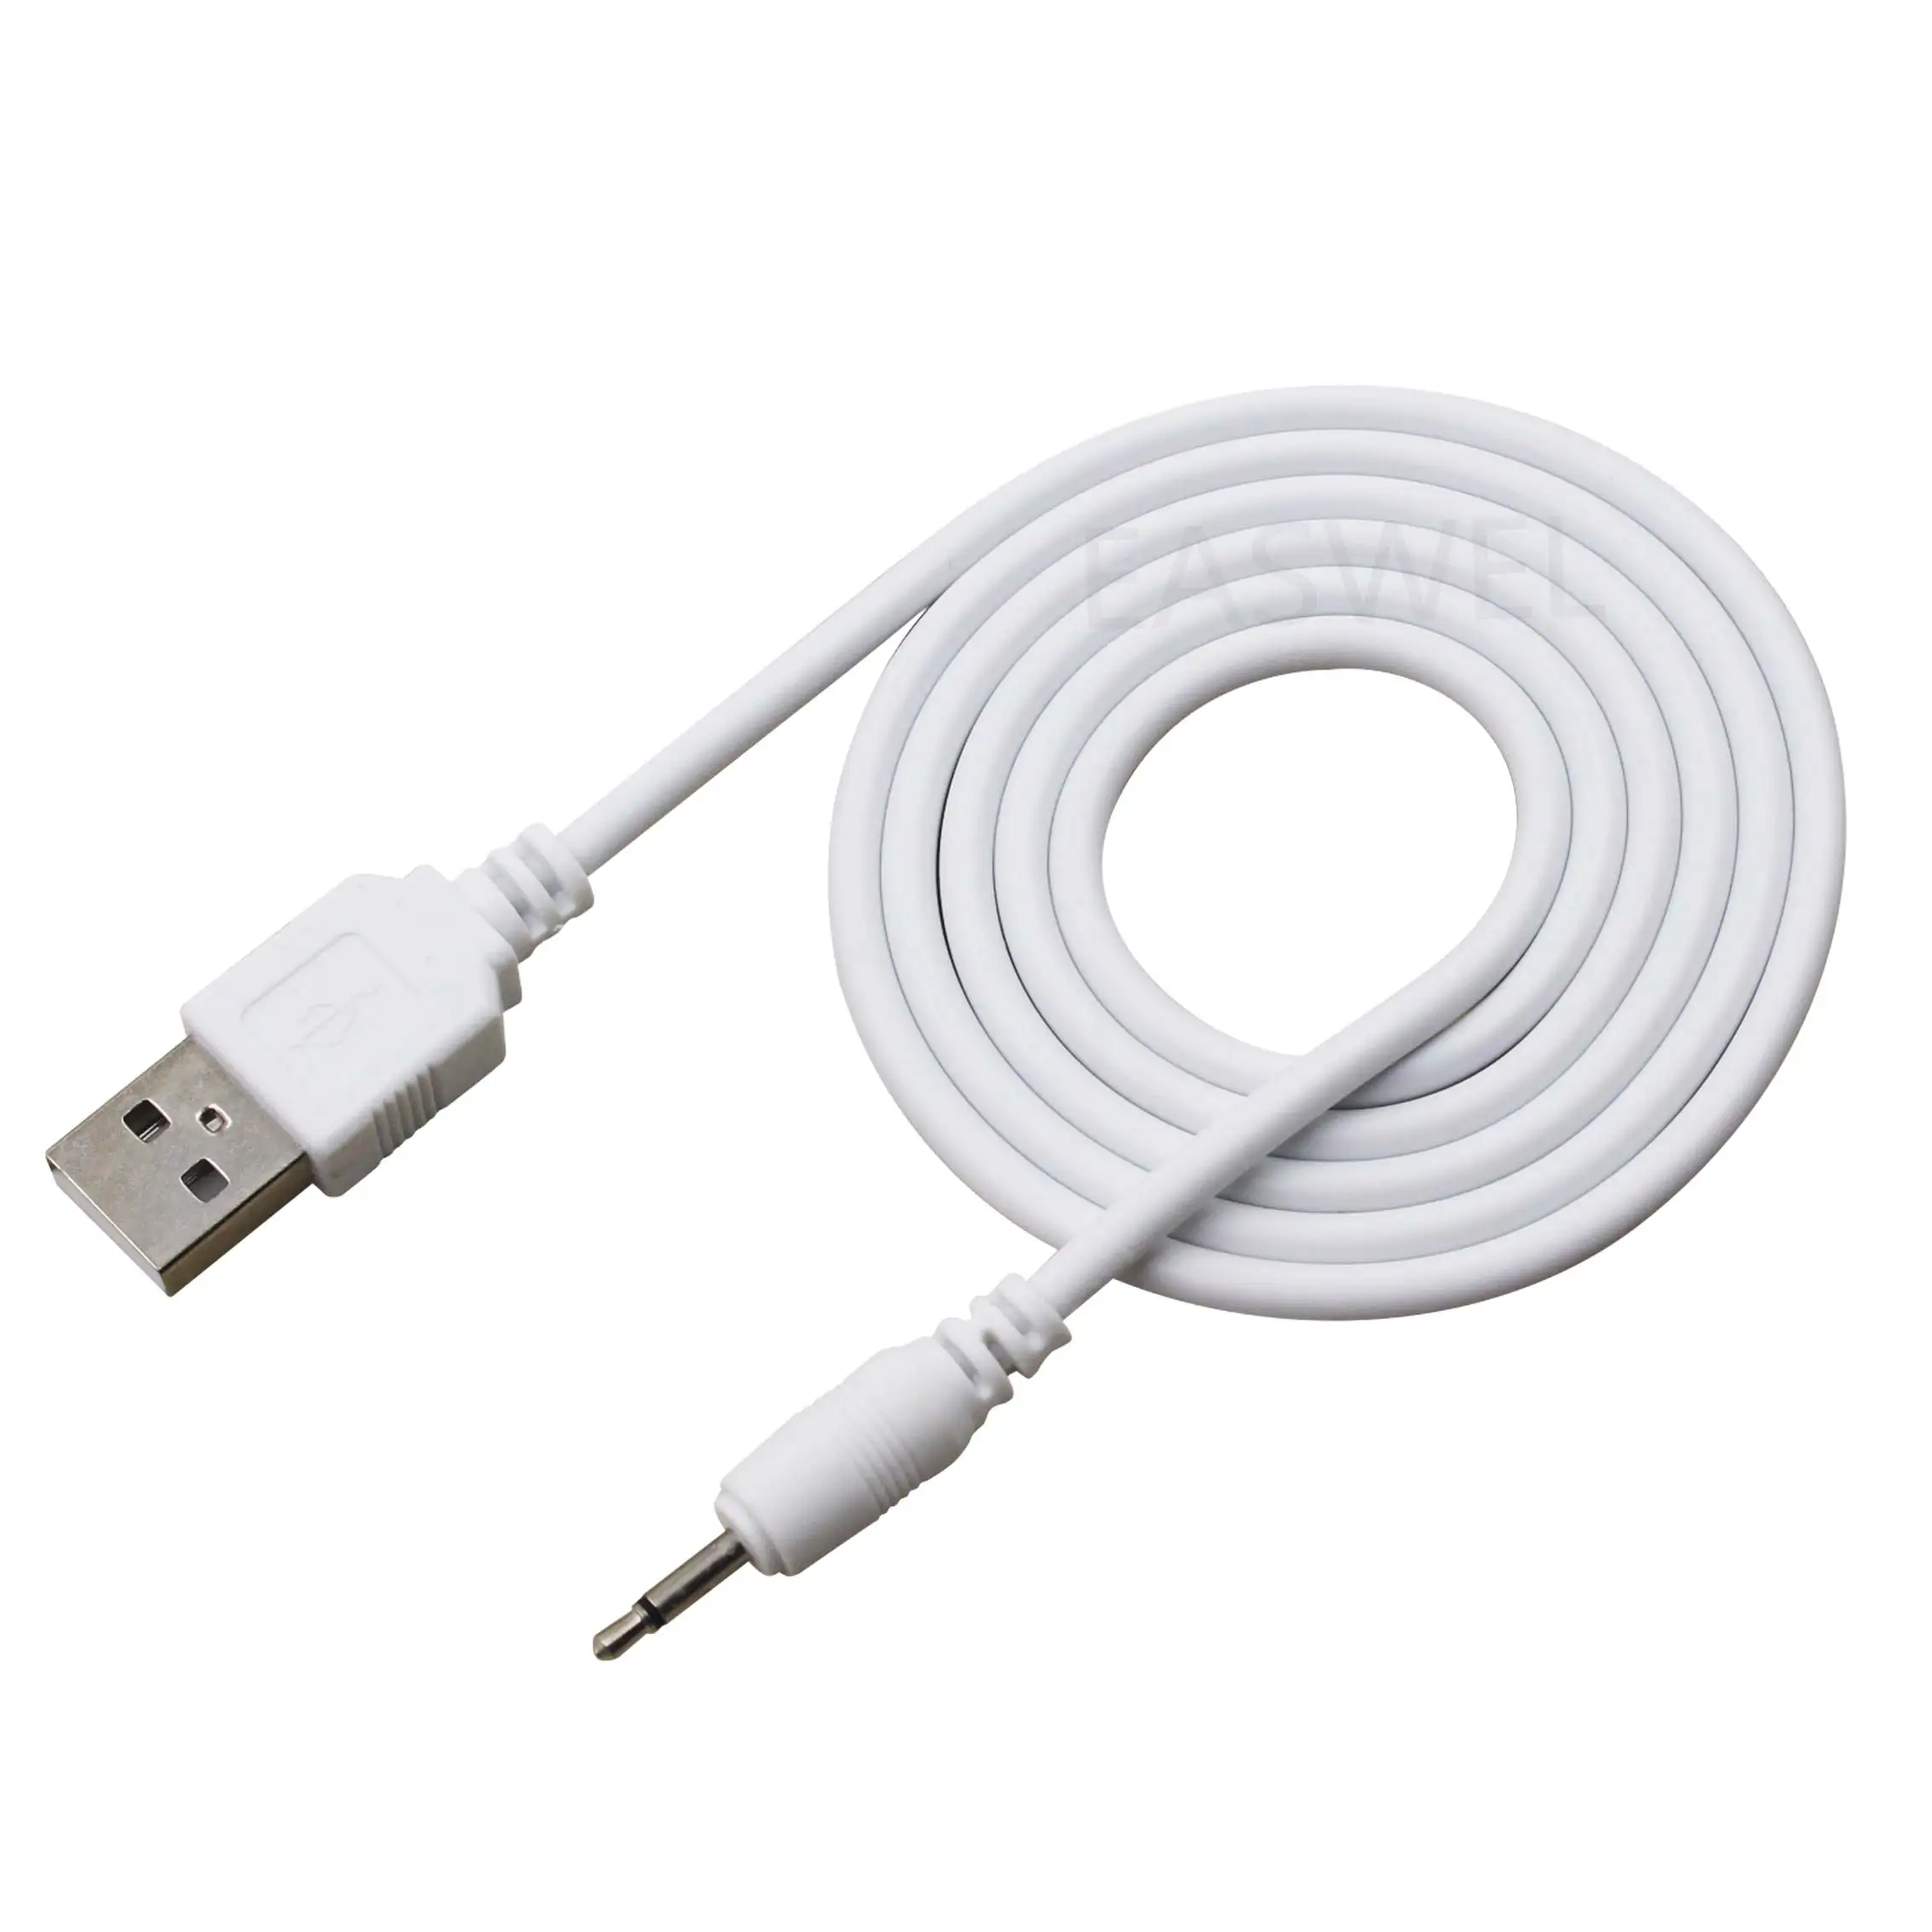 CJP-Geek 3ft White USB DC Power Adapter Charger Cable Lead Replacement for  Envie Wand Vibrator